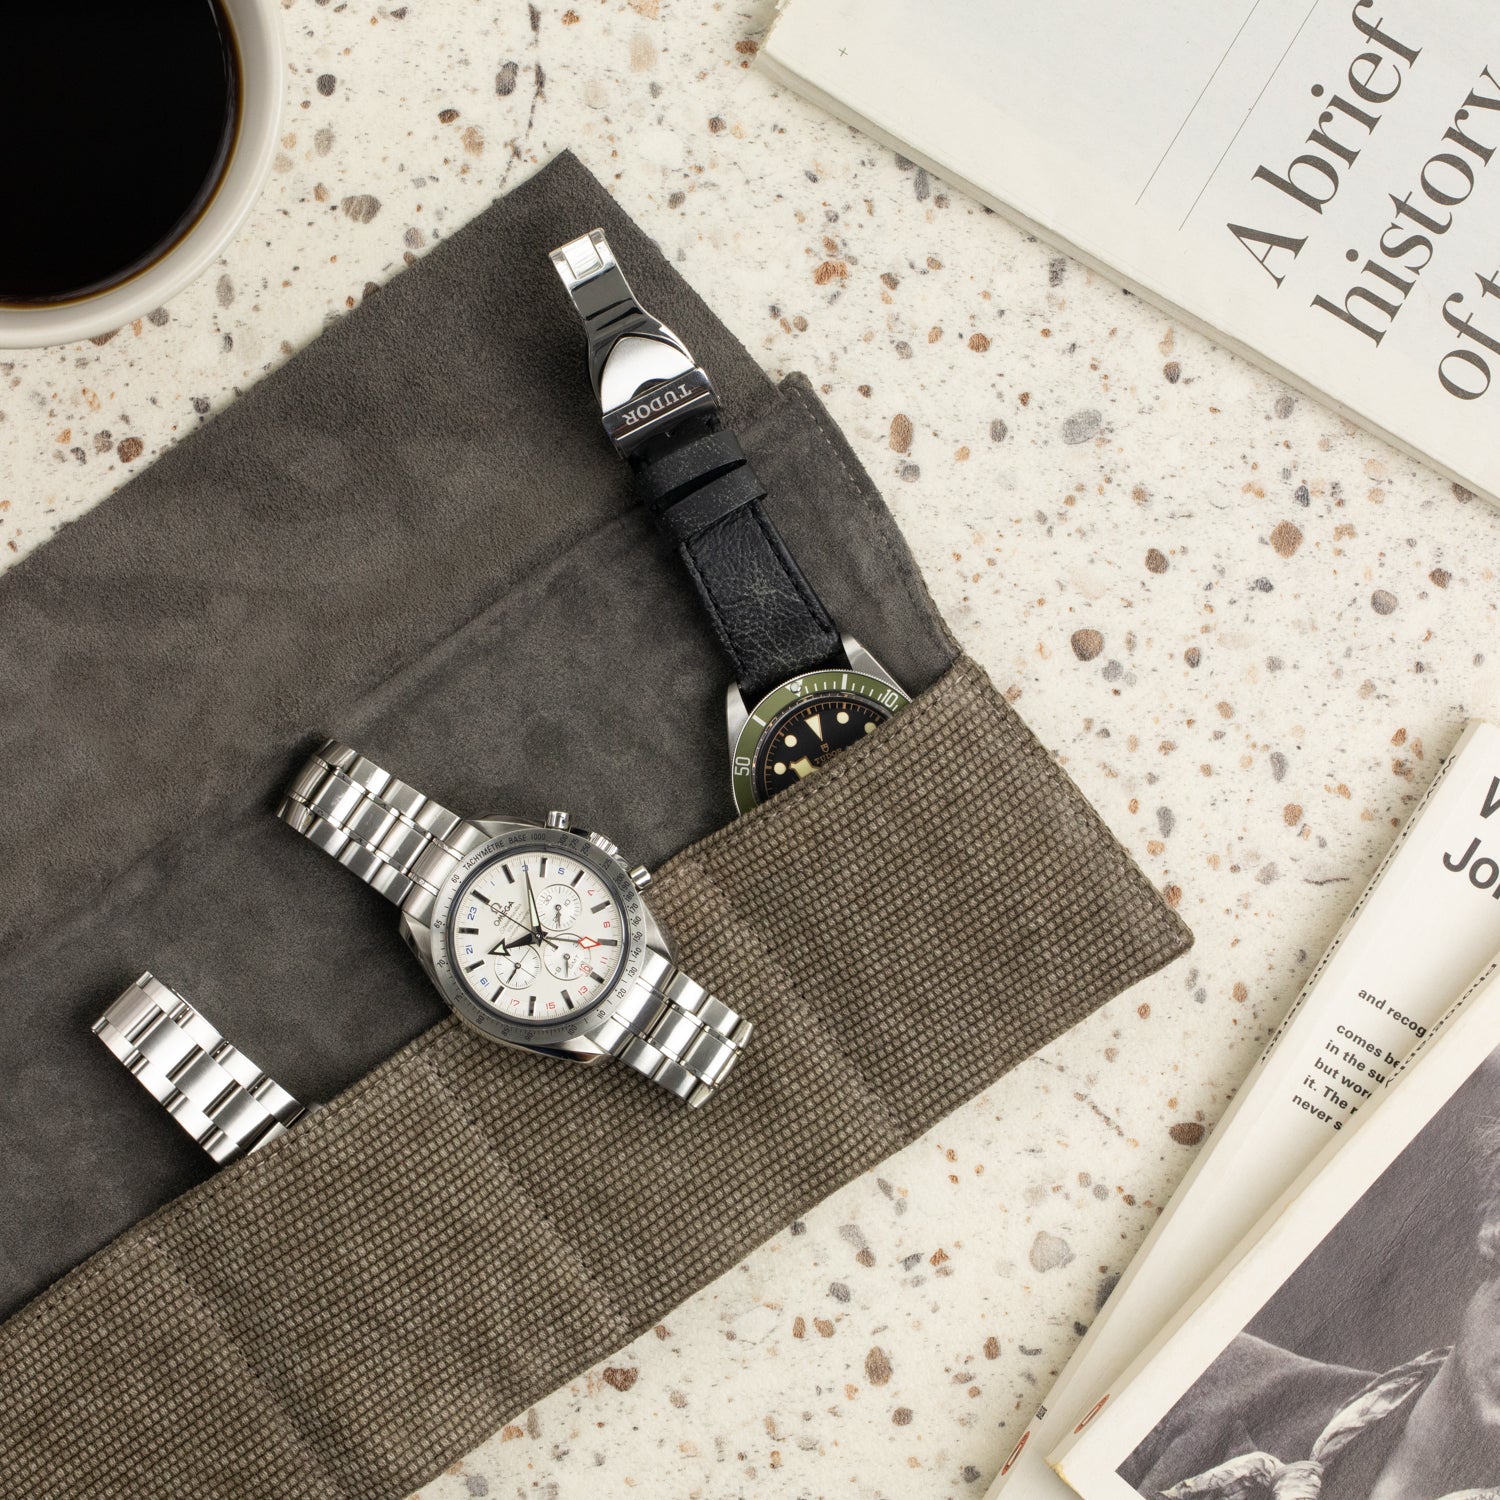 The Les Noble Canvas Watch Roll | aBlogtoWatch